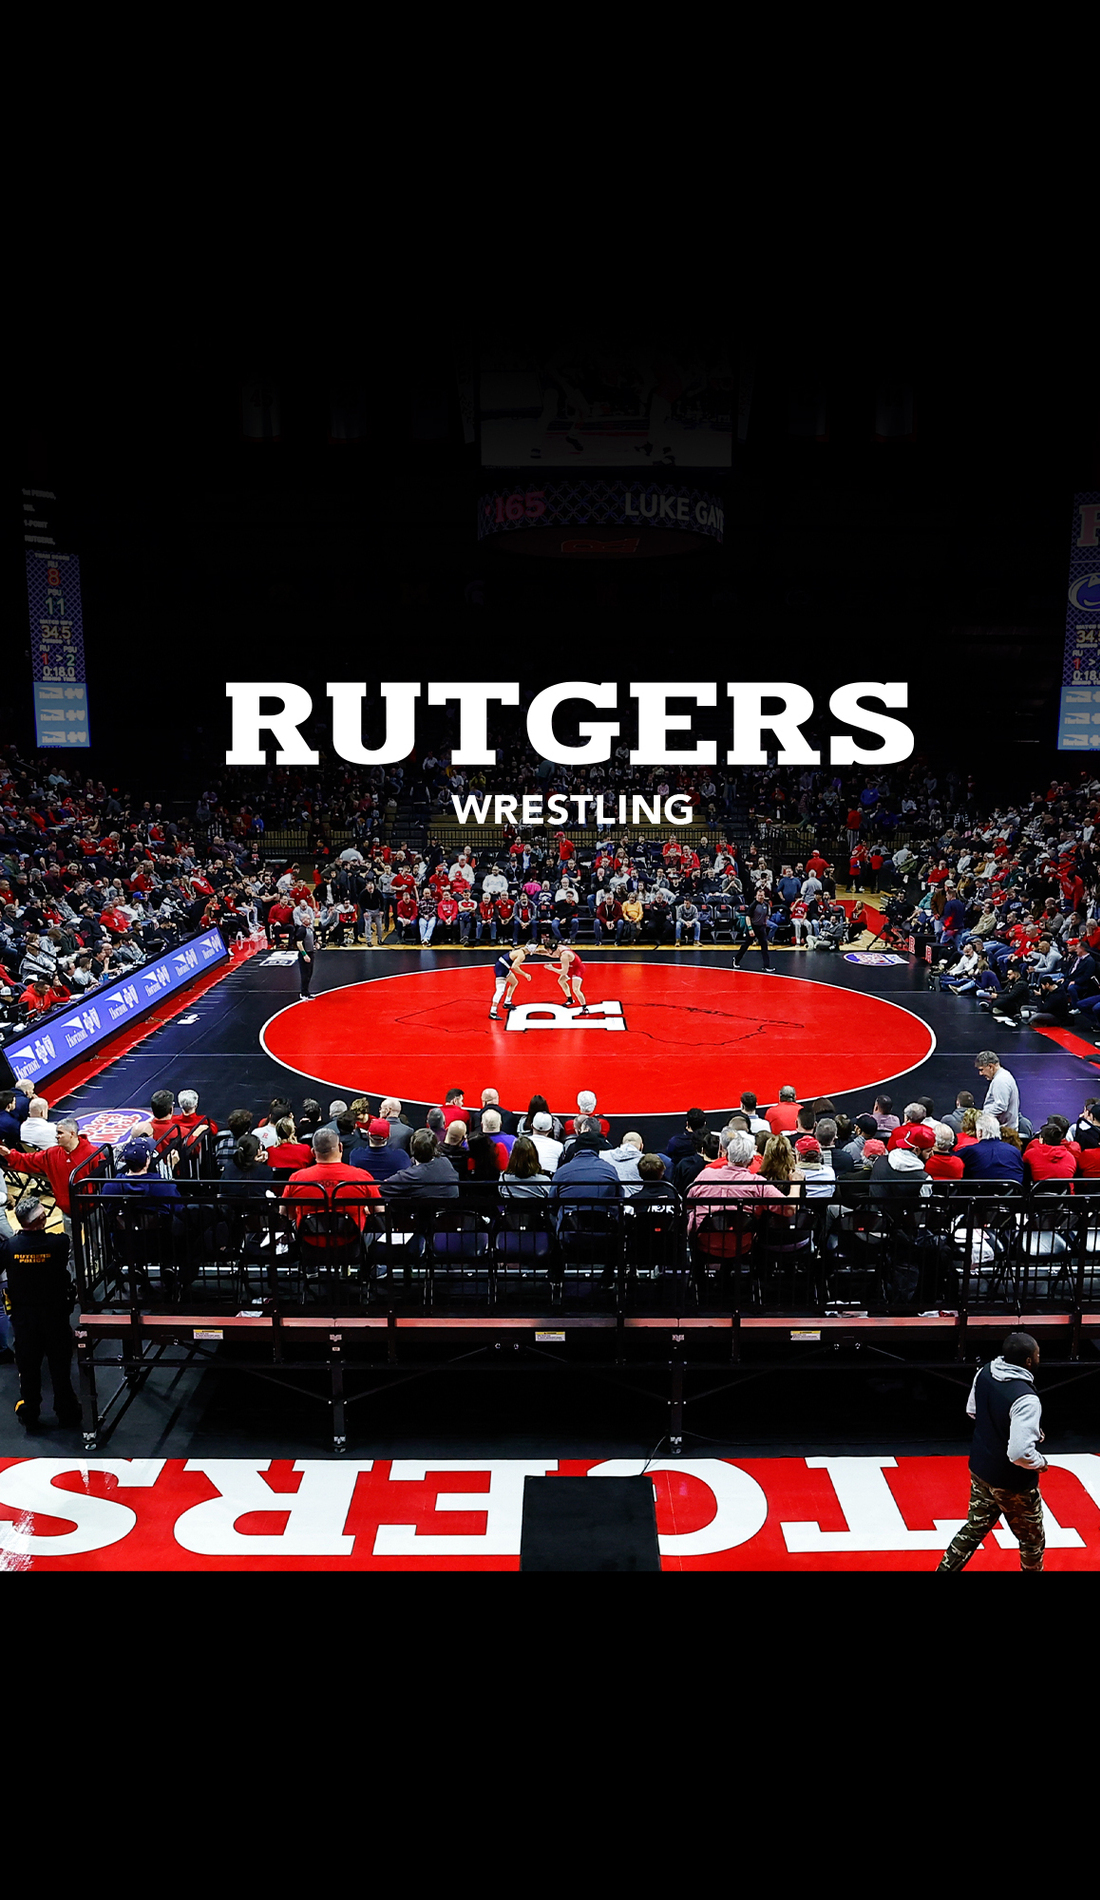 A Rutgers Scarlet Knights Wrestling live event